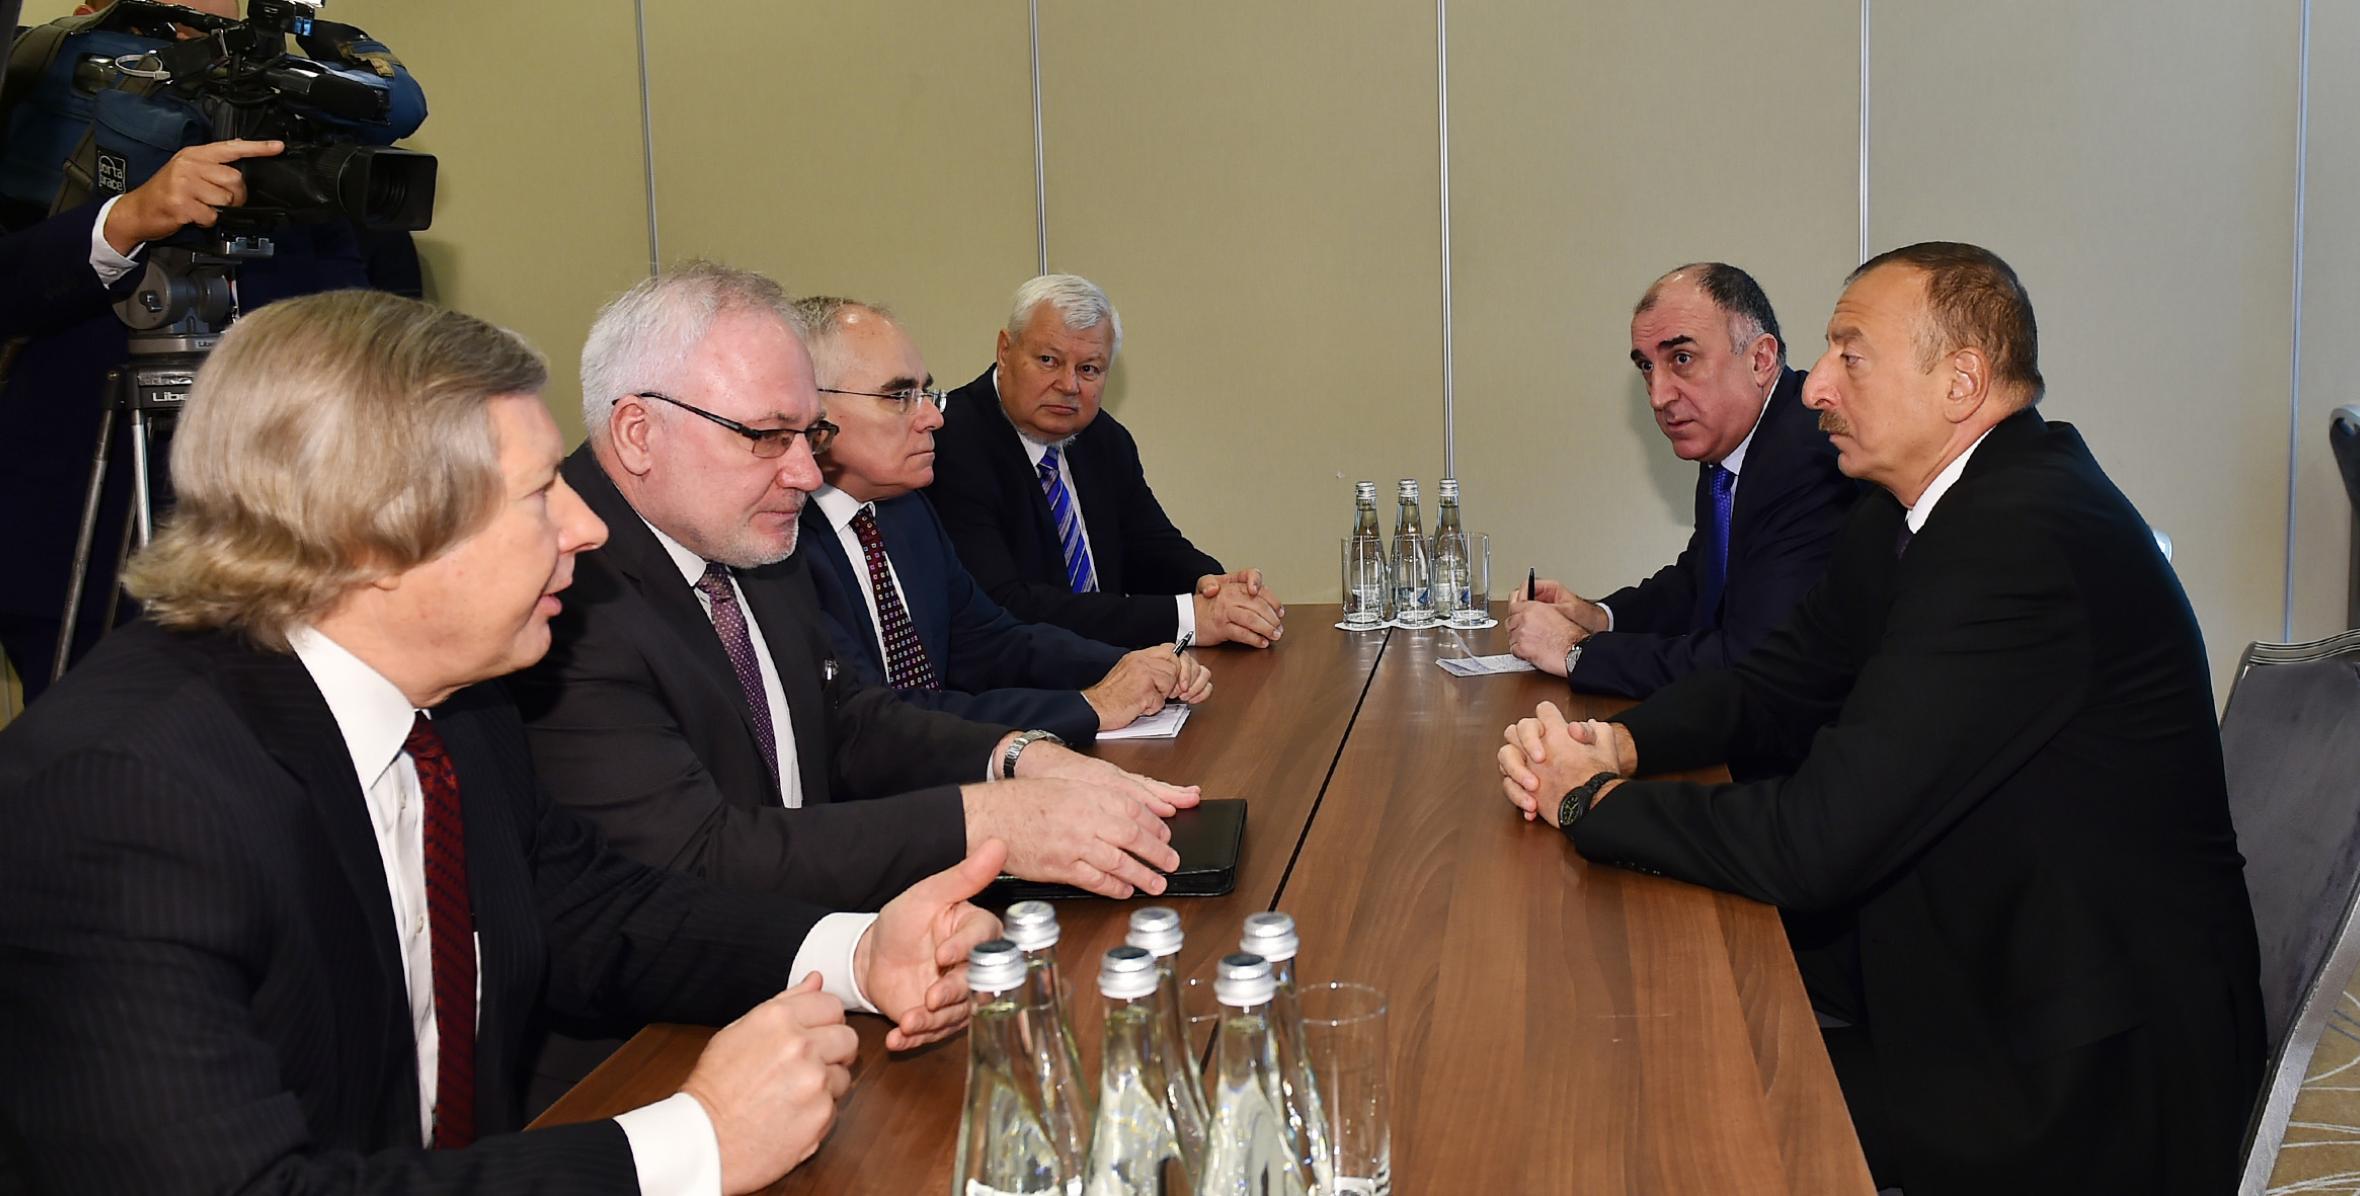 Ilham Aliyev met with OSCE Minsk Group co-chairs and Personal Representative of OSCE Chairperson-in-Office in Warsaw